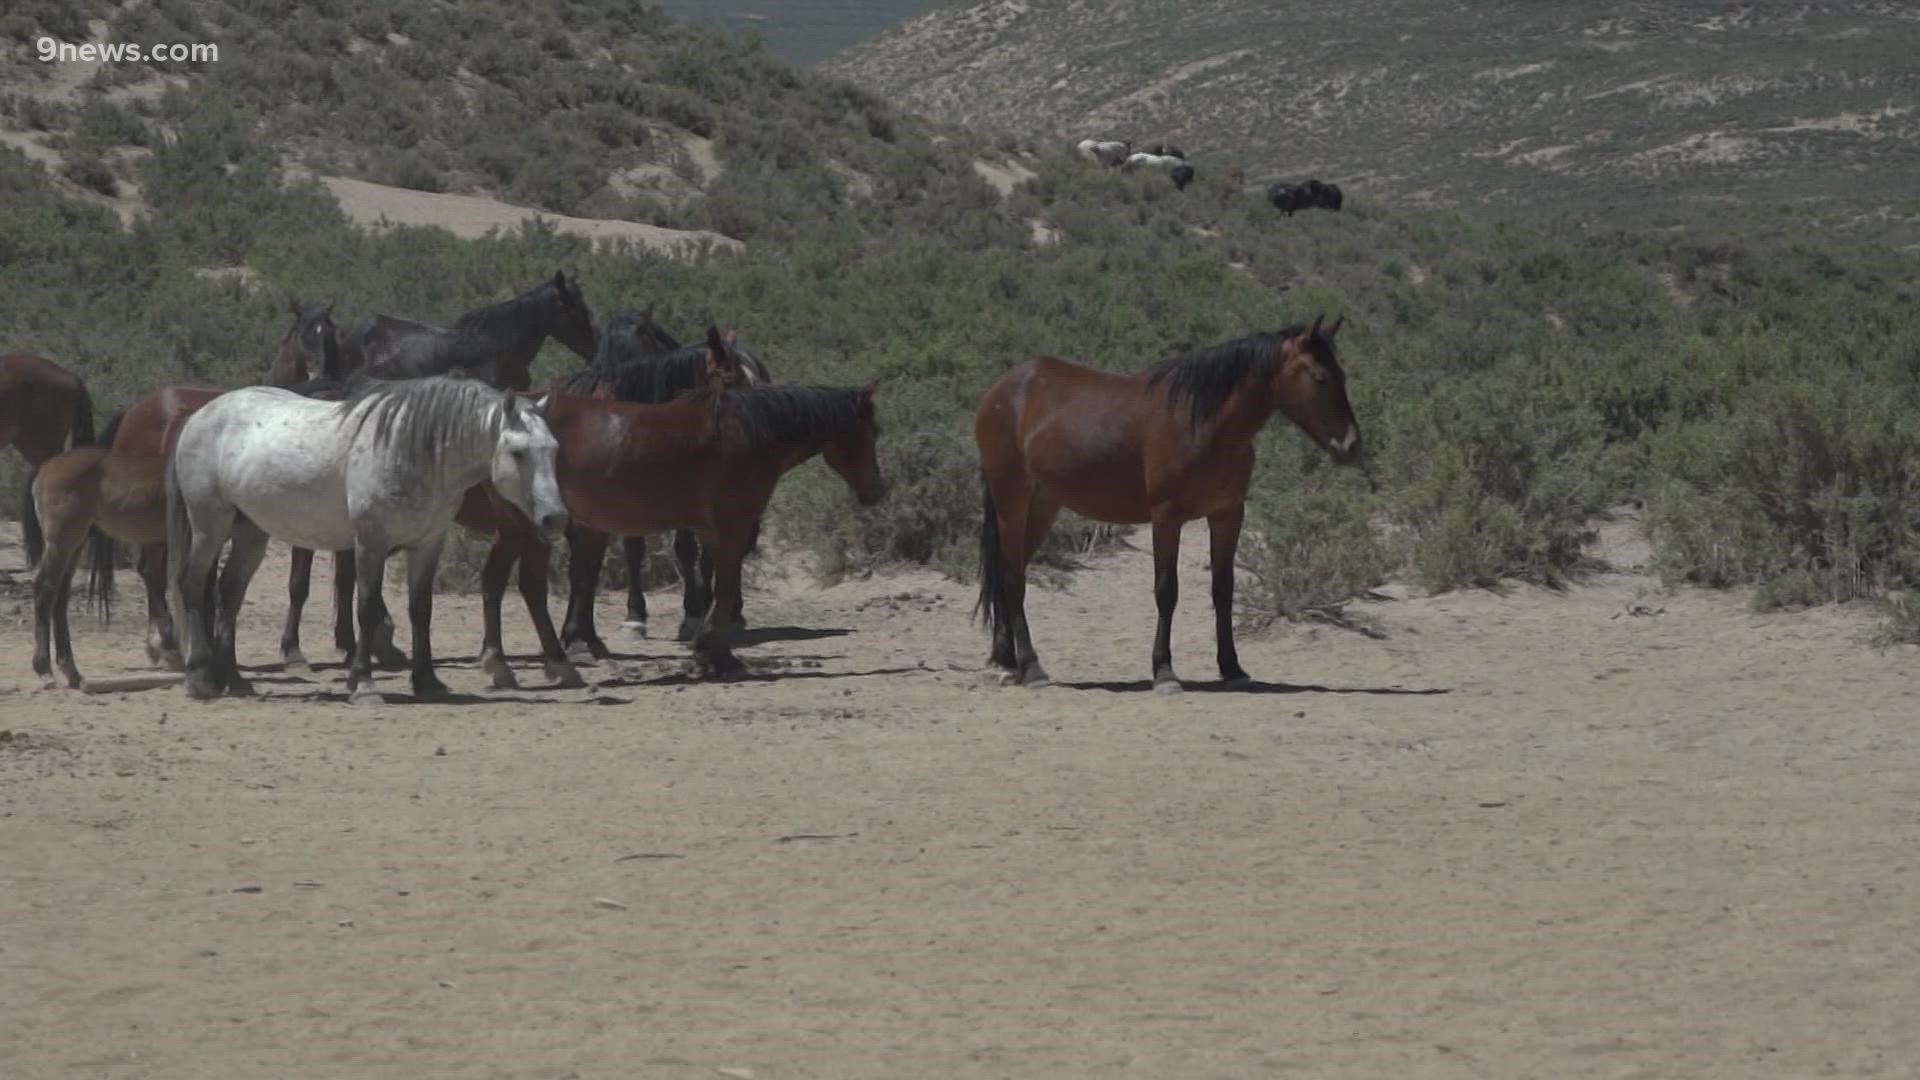 Wild Horse Warriors, a non profit created by sisters Aletha Dove and Cindy Wright have been fighting to protect the wild horses of Sand Wash Basin for years.